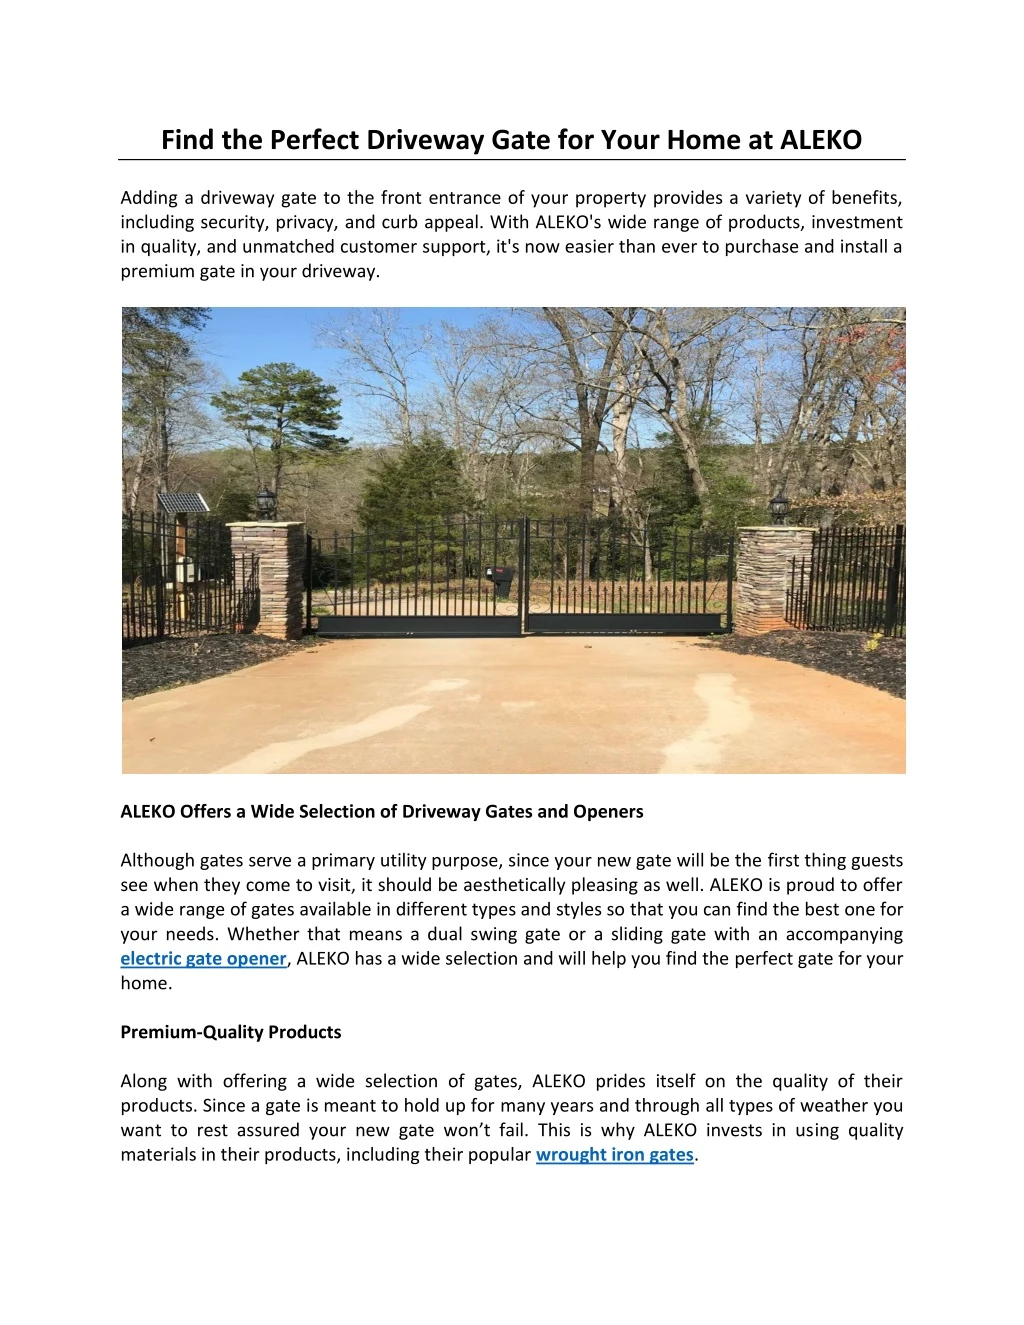 find the perfect driveway gate for your home